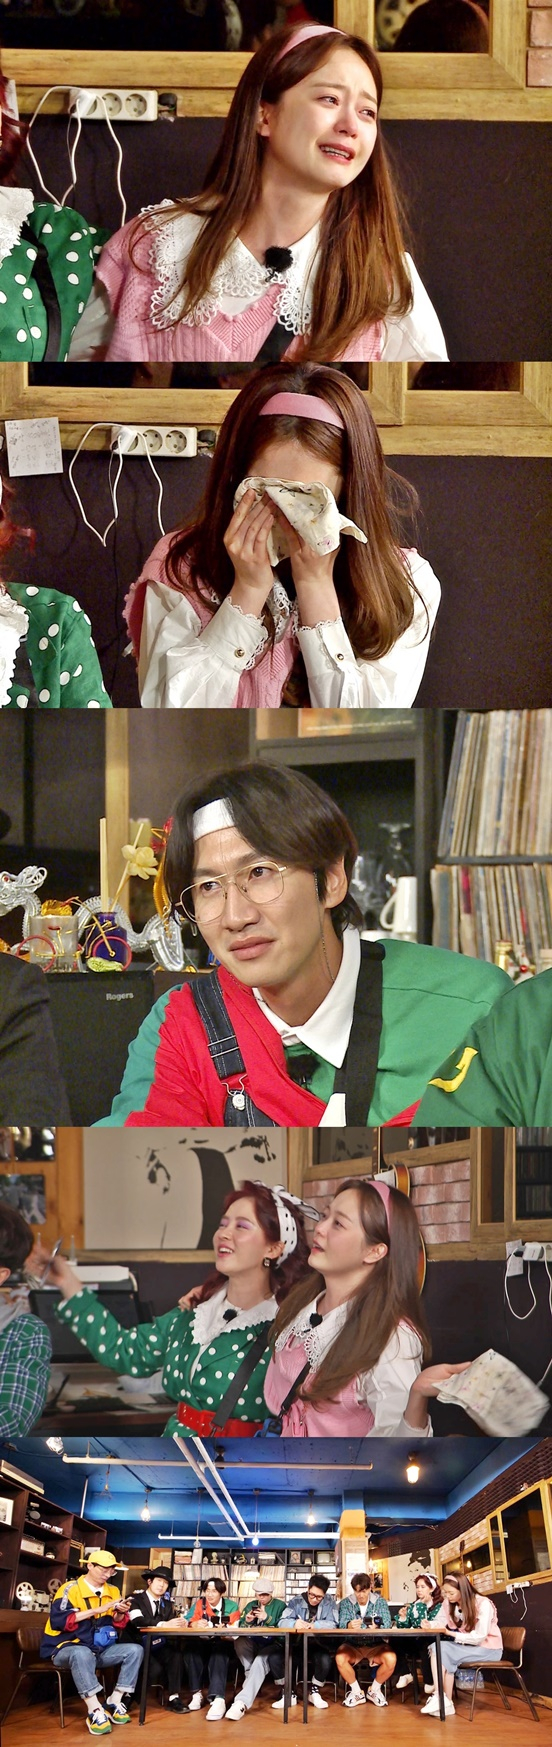 On SBS Running Man, which will be broadcasted on May 2, the story of Jeon So-min suddenly leaking tears during the recording will be revealed.The first episode of 91th Izu Bag, which was broadcast last week, gave a great deal of fun with eight-color retro fashion and perfect situational drama of the members who became 91st grade.Unlike other members, Haha has become a new laughing point by introducing Michael Jackson Omaju fashion alone.This week, a full-scale recall time will be held as members past episodes are released.Members conducted a mission at the LP bar where the emotions of the 90s were buried, and submitted the stories and application songs that had been hidden.When I was in school, I wanted to give up my dream of a singer on the contrary of my parents. With the story of Kim Jong Kook, Choi Ho-seops Mask of the Year came out, all the members were soaked in memories with their hands tightly.At this time, Running Man representative emotionalist Jeon So-min said, Its a start again.Especially, I could not speak with the lyrics Do not forget and remember and Jeon So-min recalled the past faintly, saying, Memories, I do not write a chapter ... Before writing the story, Have you ever drank angels and coffee?And made a meaningful love story with the title of the song, making the members buzz.On this day, Lee Kwang-soo, who wants to do a financial piety to his mother, from the story of Yang Se-chan, who had a big fire in his childhood home, and Hahas childhood, which was exceptionally introspective, attracted attention.The reason why Jeon So-min spilled Tears and the past history of members will be revealed at Running Man which is broadcasted at 5 pm on Sunday, the 2nd.